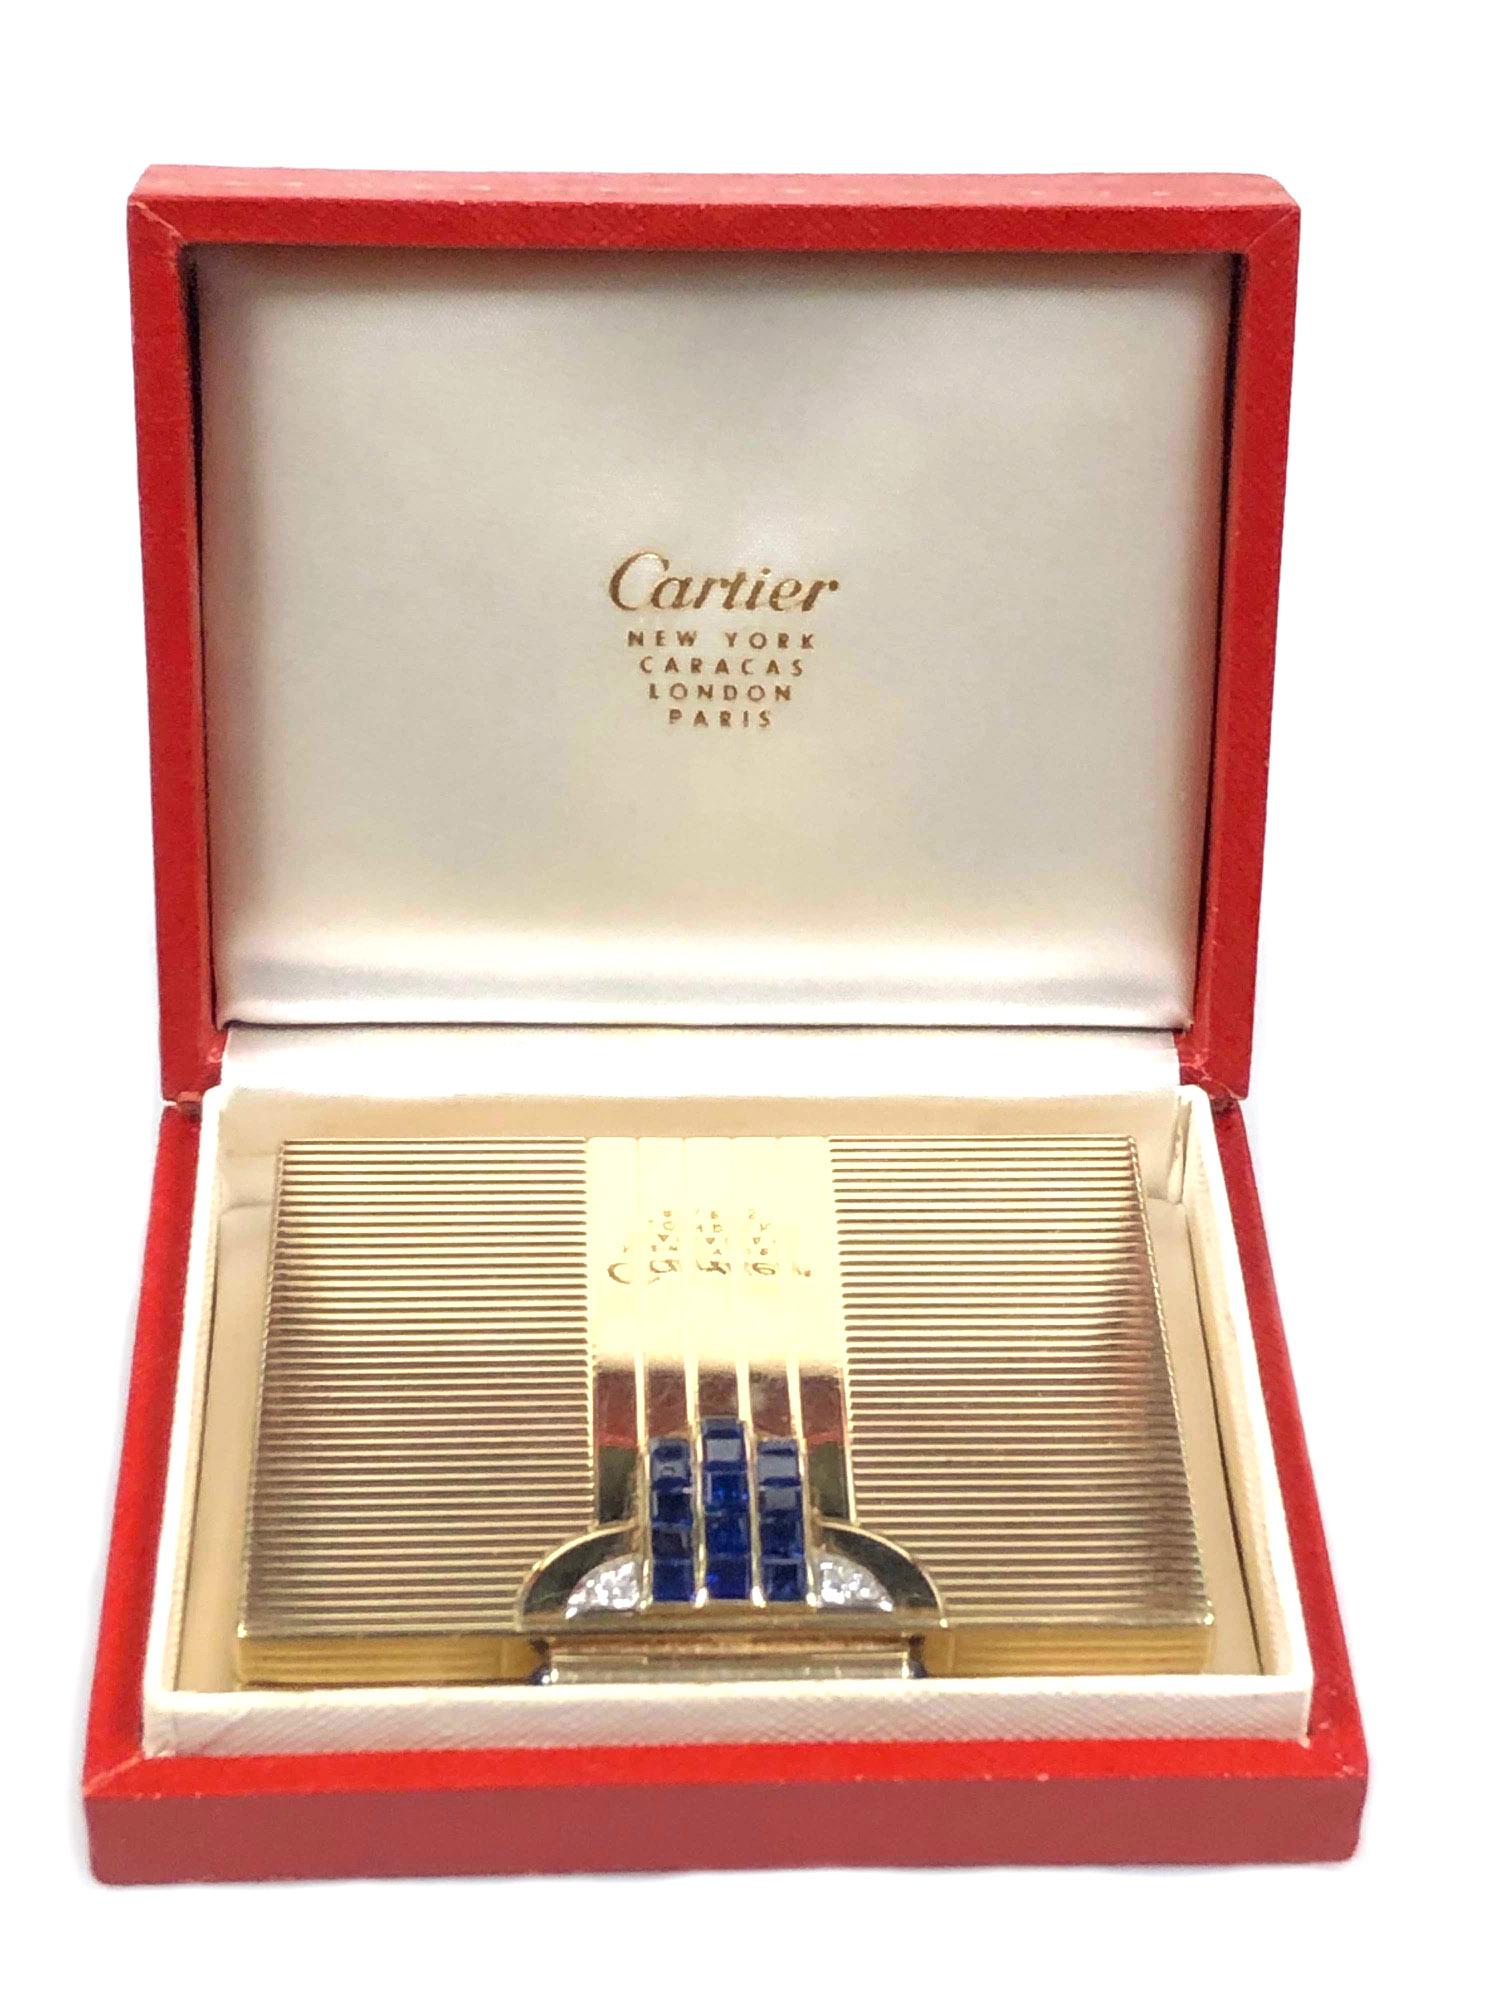 Cartier 1940s Art Deco Gold Diamond and Sapphire Compact 1